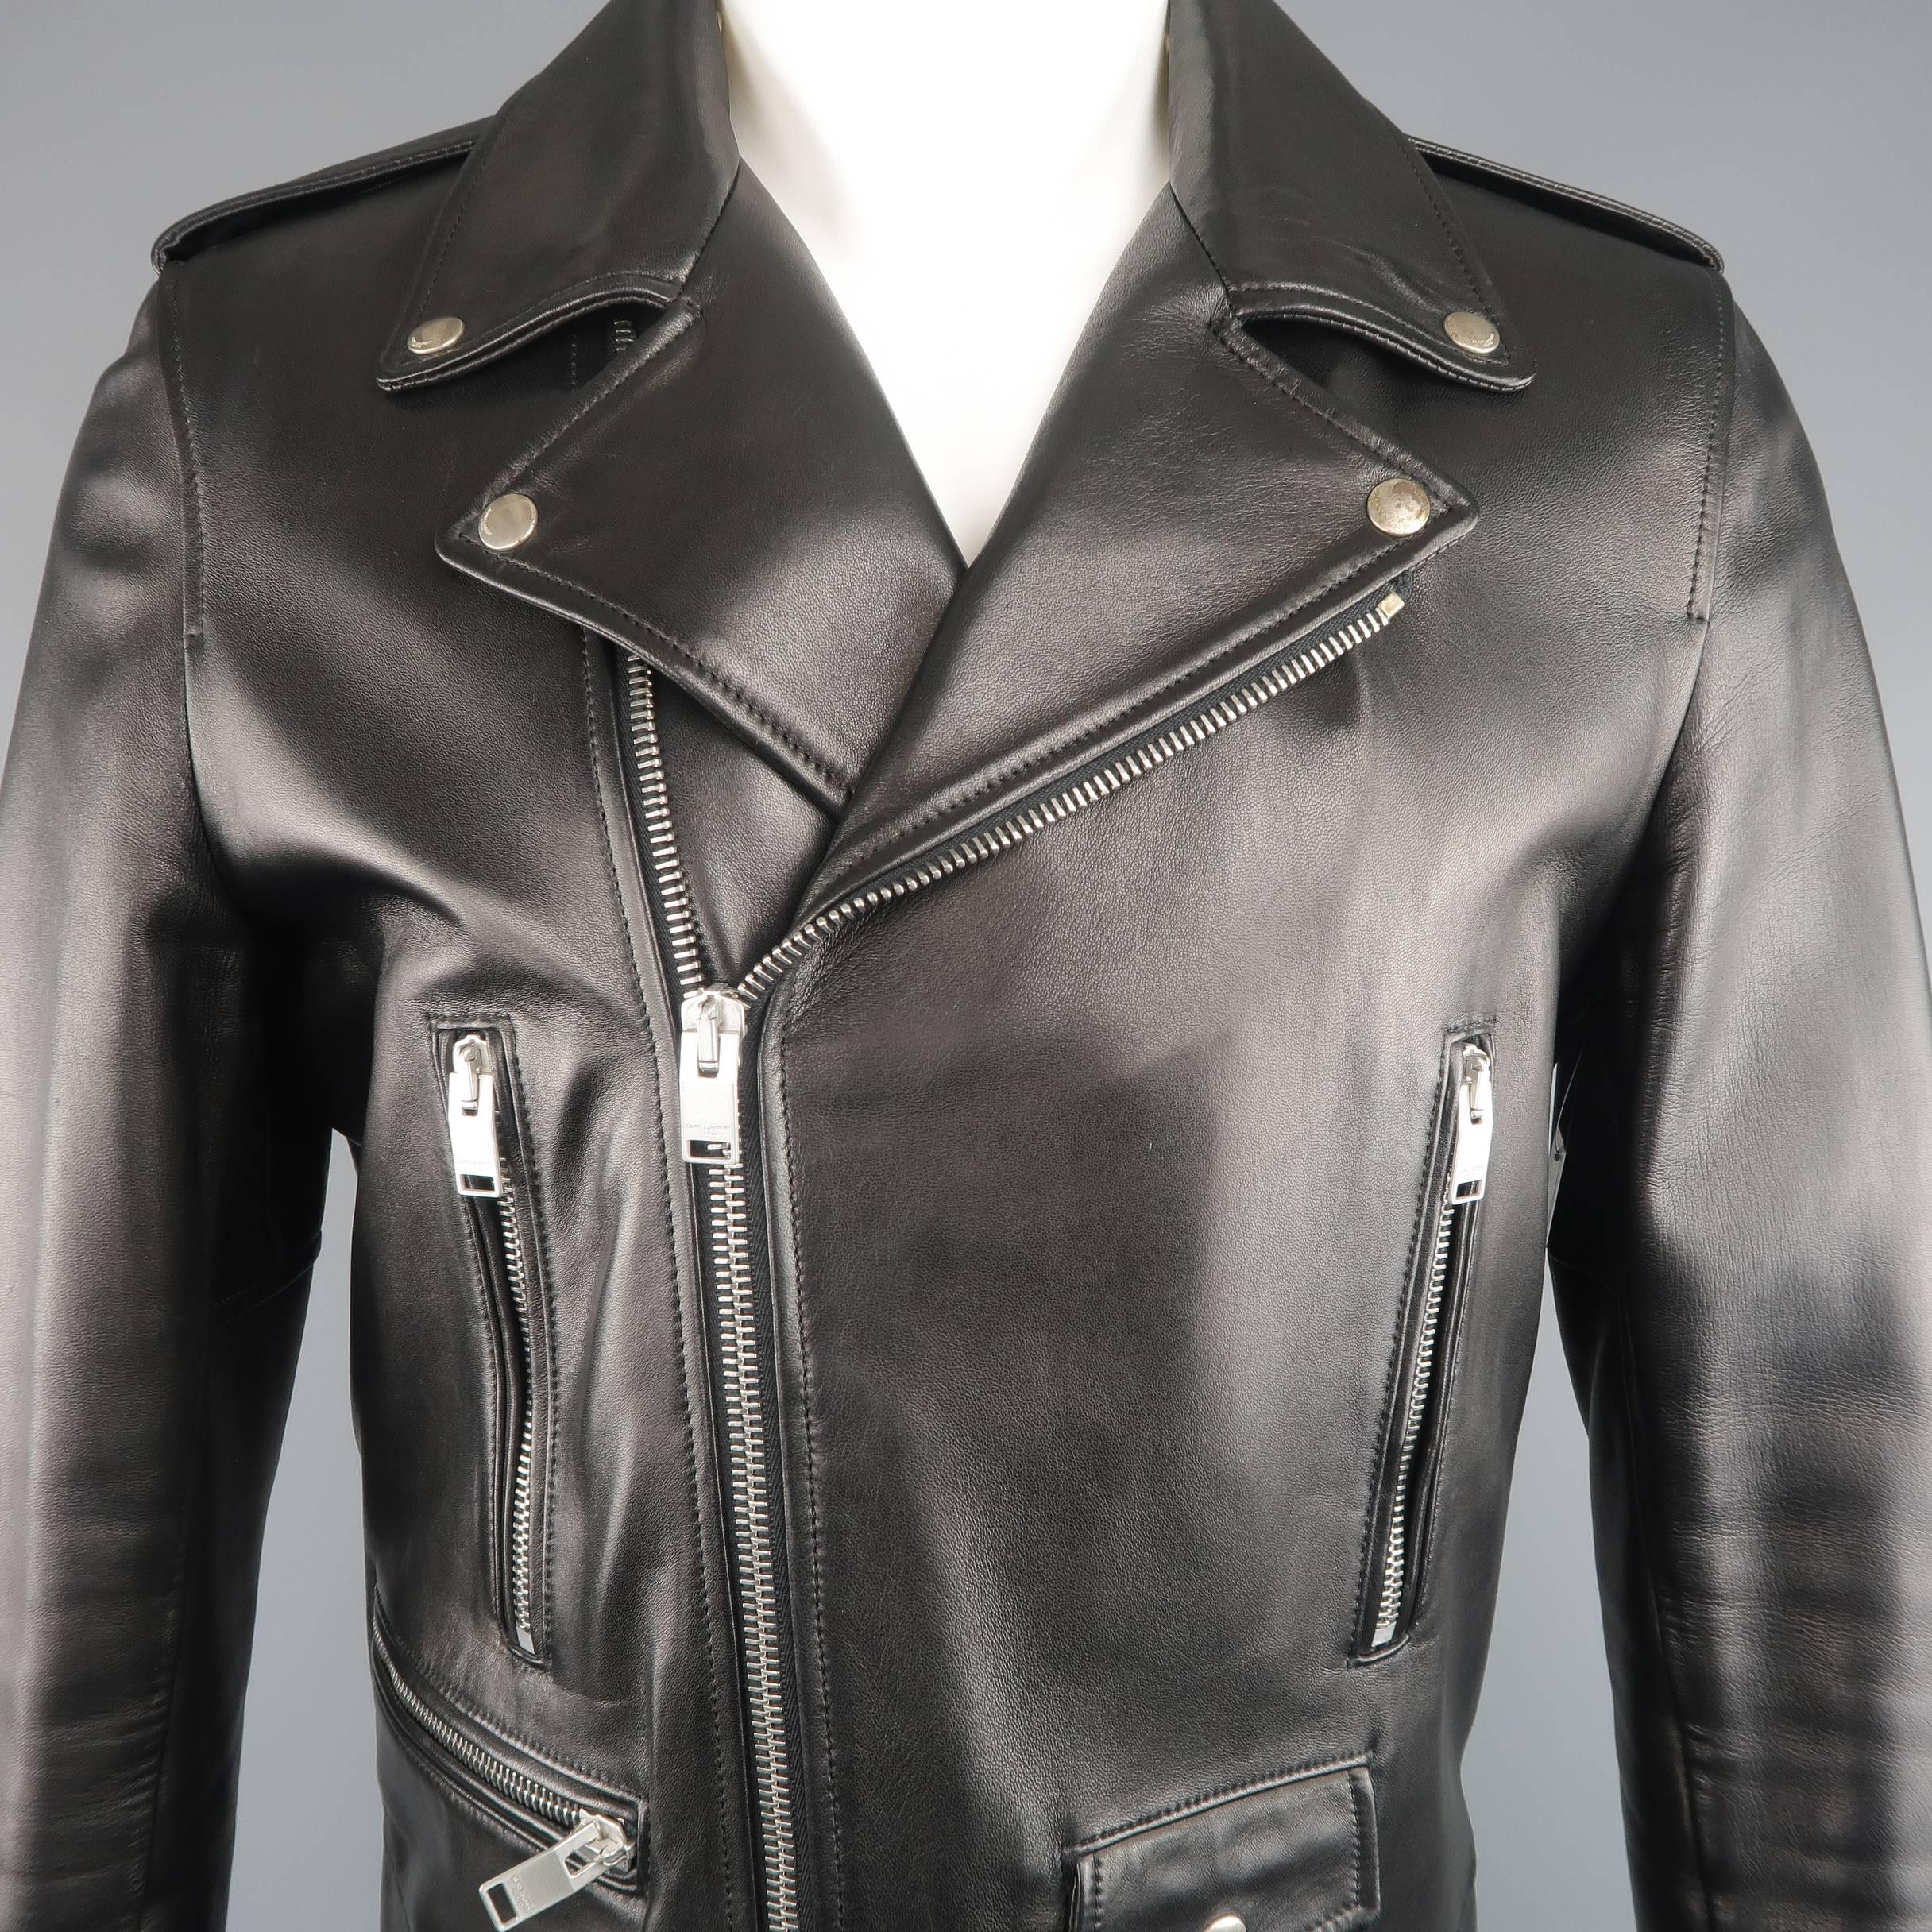 Classic SAINT LAURENT moto biker jacket by Hedi Slimane comes in smooth black lambskin leather and features a pointed collar snap down lapel, epaulets, asymmetrical zip front, zip pockets, snap belt loops, and zip cuffs. Minor wear including